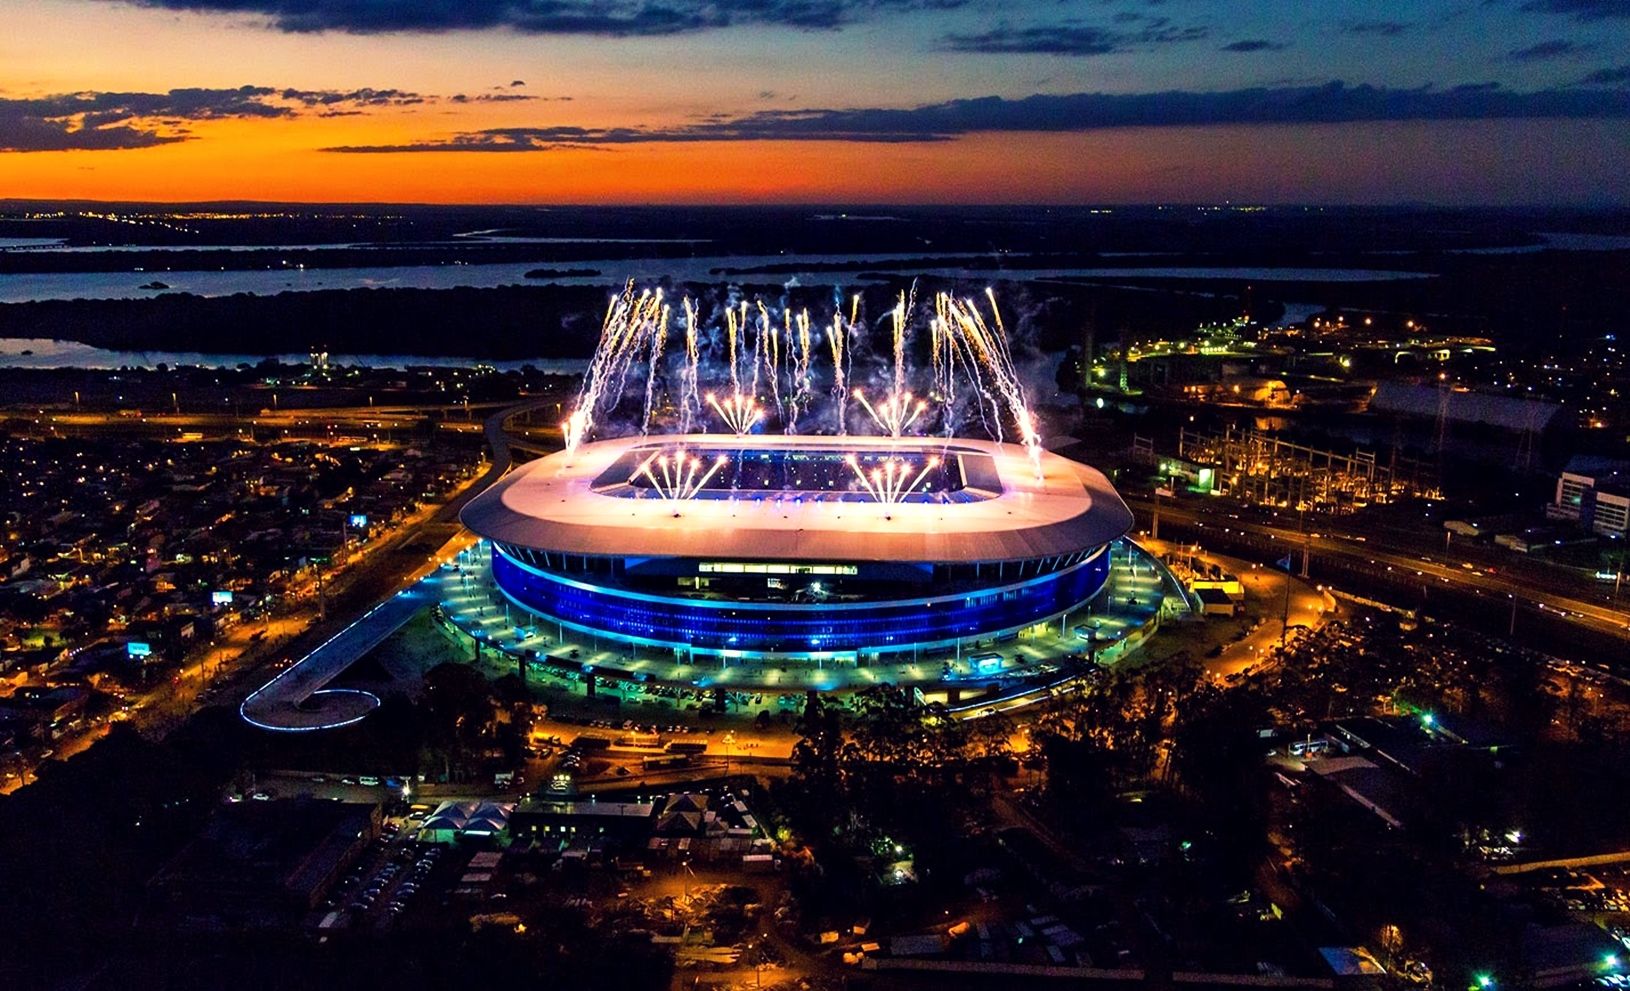 1630x991 px Gremio Porto Alegre Soccer Clubs Stadium High Quality Wallpapers,High Definition Wallpapers